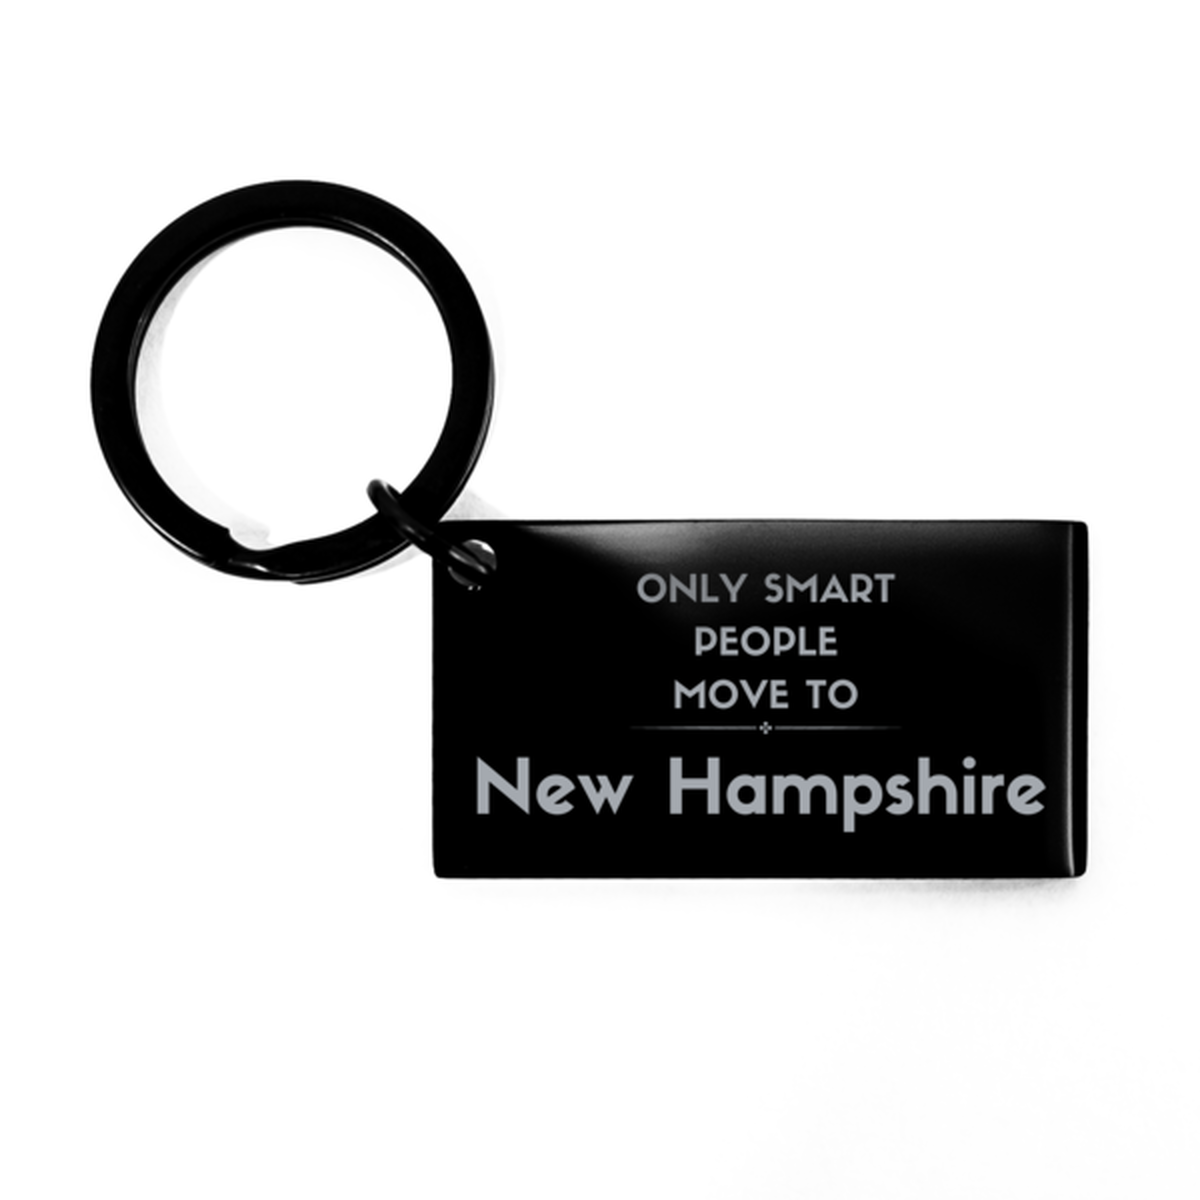 Only smart people move to New Hampshire Keychain, Gag Gifts For New Hampshire, Move to New Hampshire Gifts for Friends Coworker Funny Saying Quote